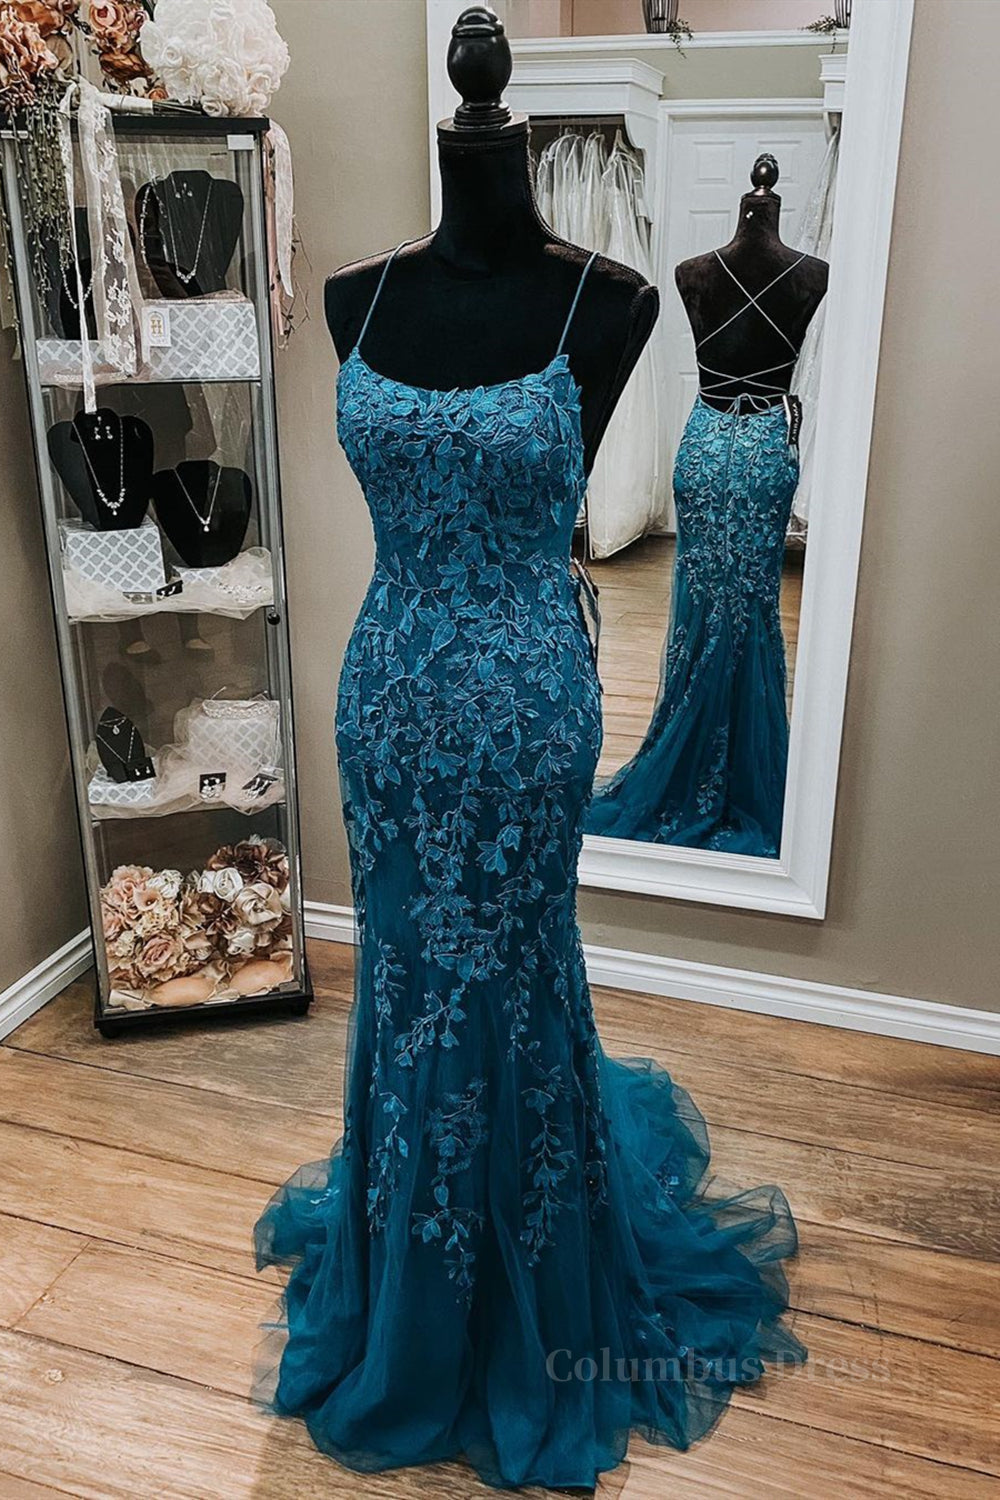 Backless Mermaid Dark Teal Lace Long Corset Prom Dress, Mermaid Teal Lace Long Corset Formal Evening Dress outfit, Evening Dresses Wedding